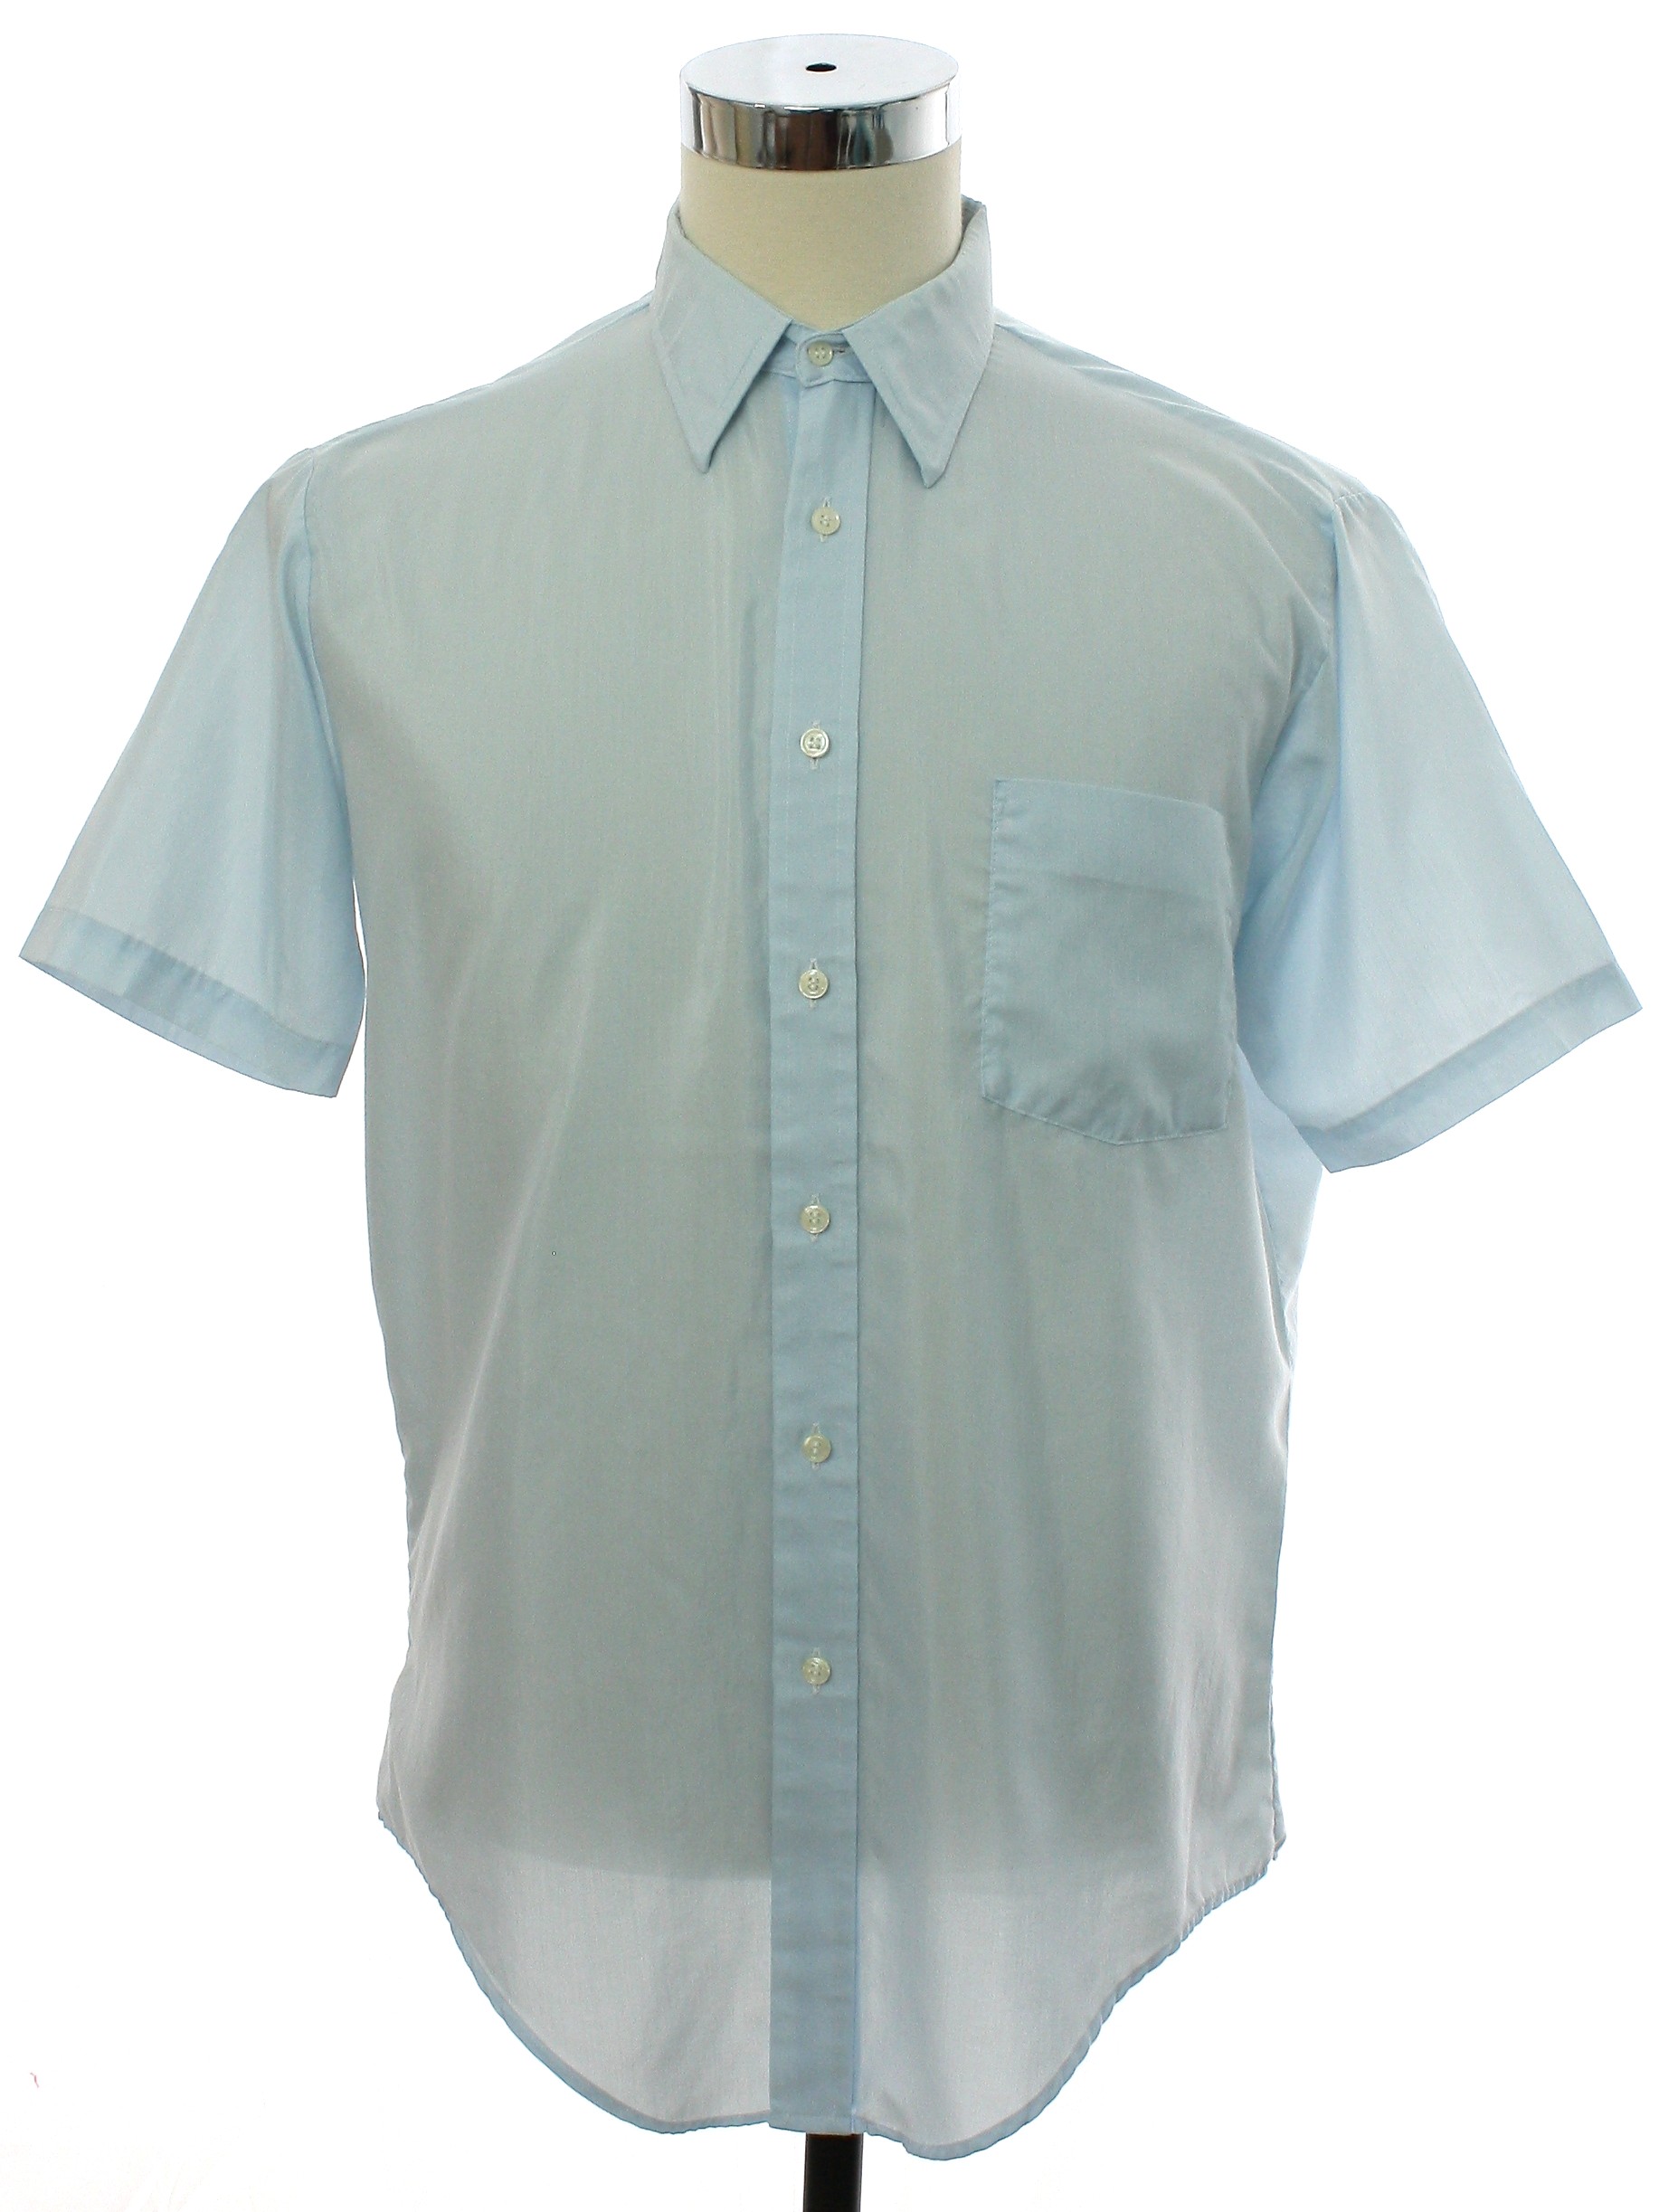 80's Vintage Shirt: 80s -Candle Glow- Mens sky blue background shimmery ...